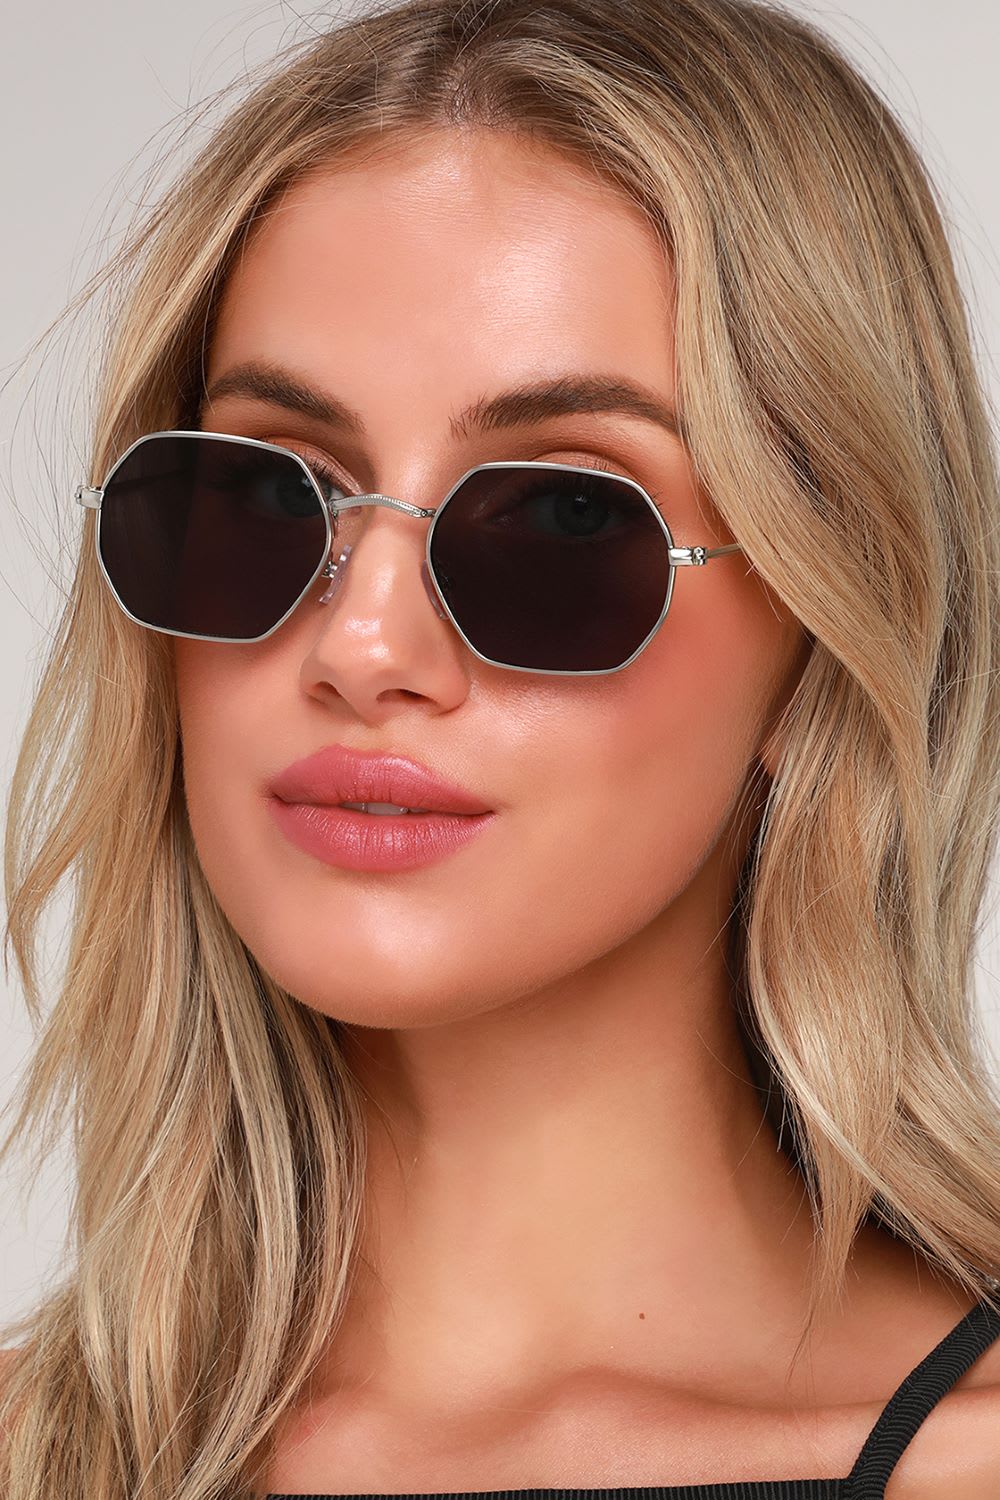 6 Sunglasses Styles and Tips for Choosing Your Shape